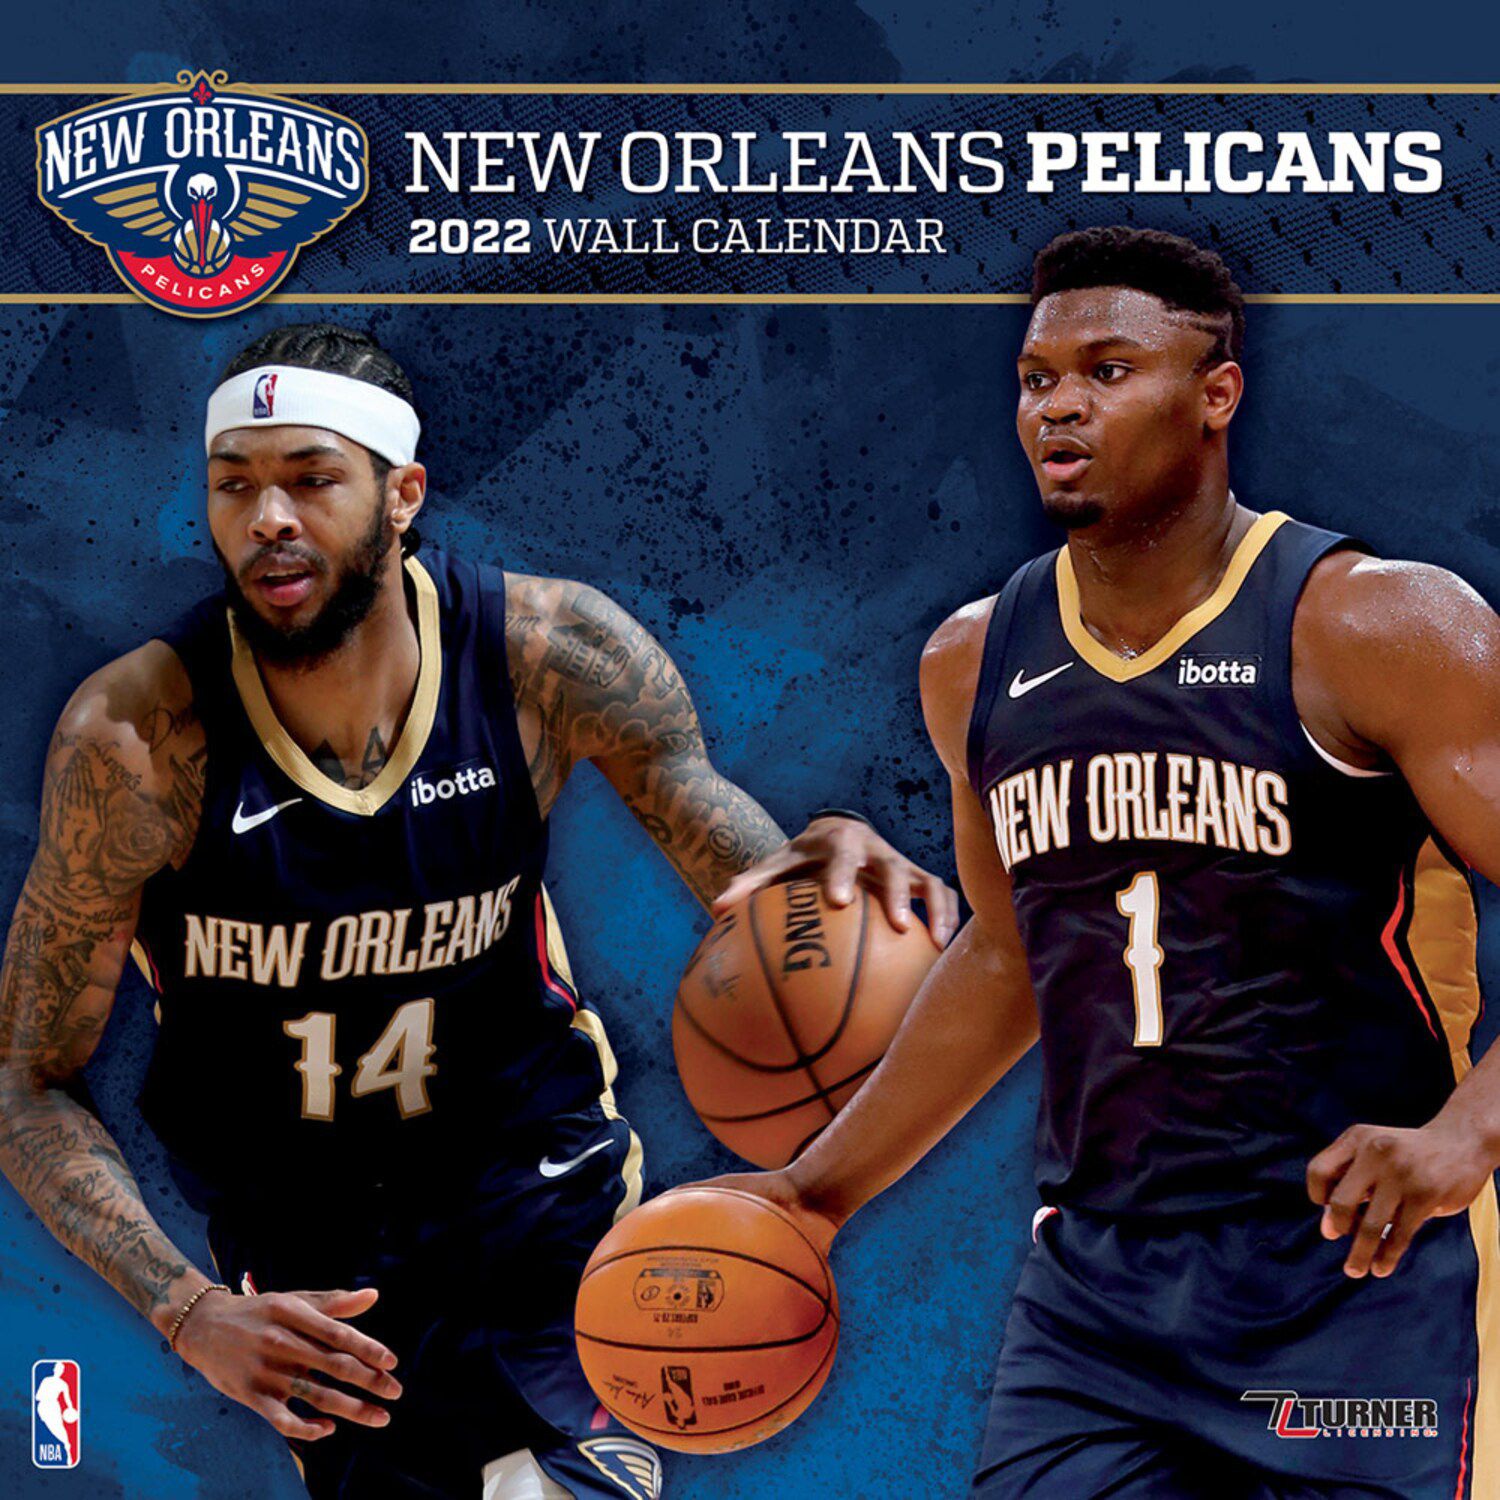 Image for Unbranded New Orleans Pelicans 2022 Wall Calendar at Kohl's.